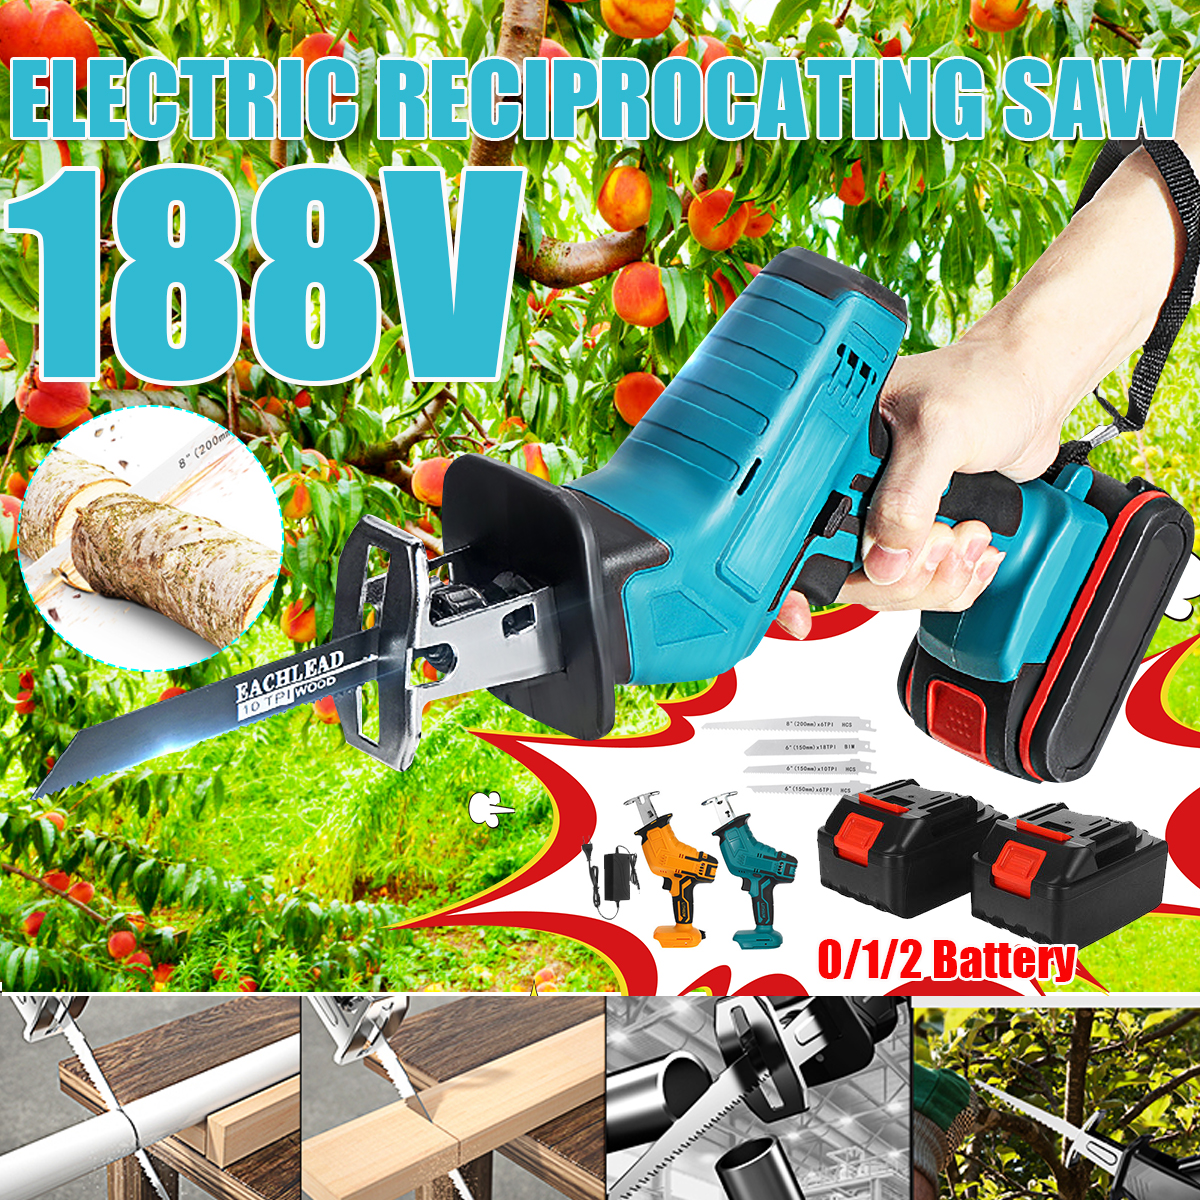 Rechargeable-Cordless-Reciprocating-Saw-Handheld-Woodorking-Wood-Cutter-W-None12-Battery--4PCS-Saw-B-1879912-2